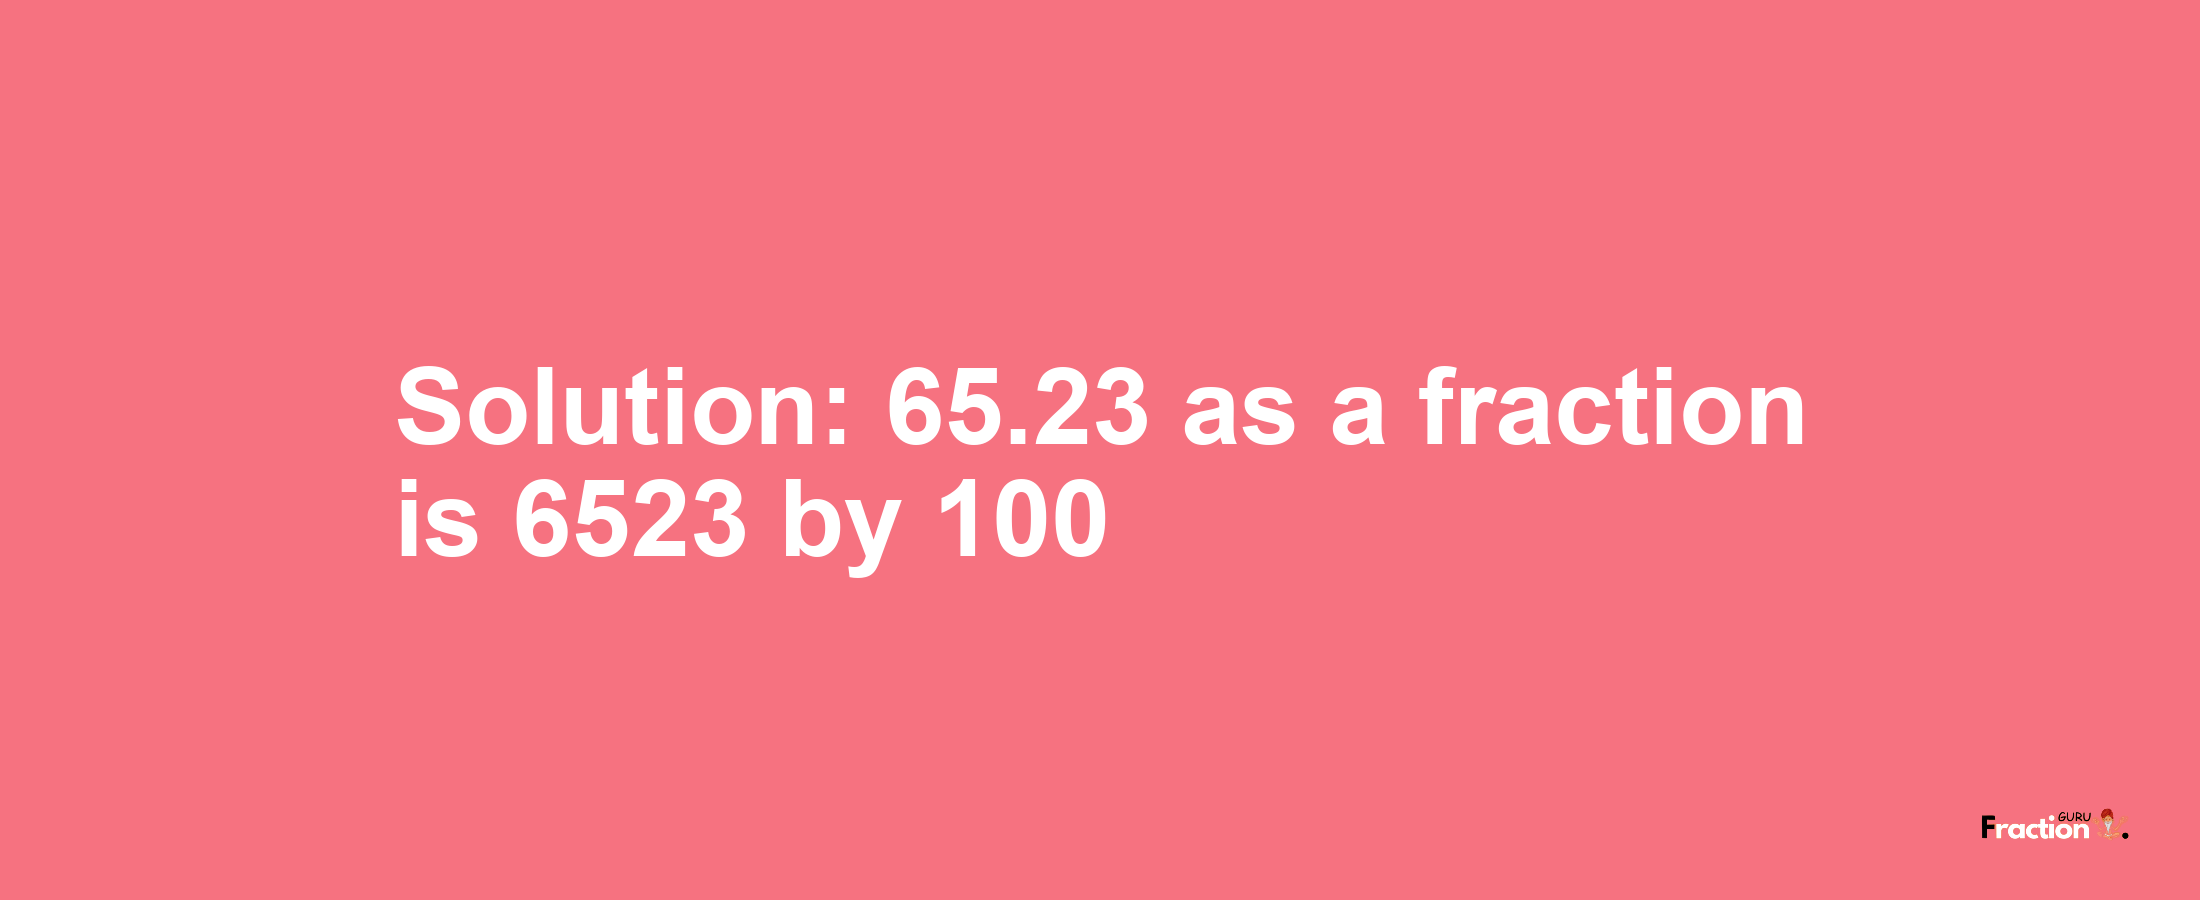 Solution:65.23 as a fraction is 6523/100